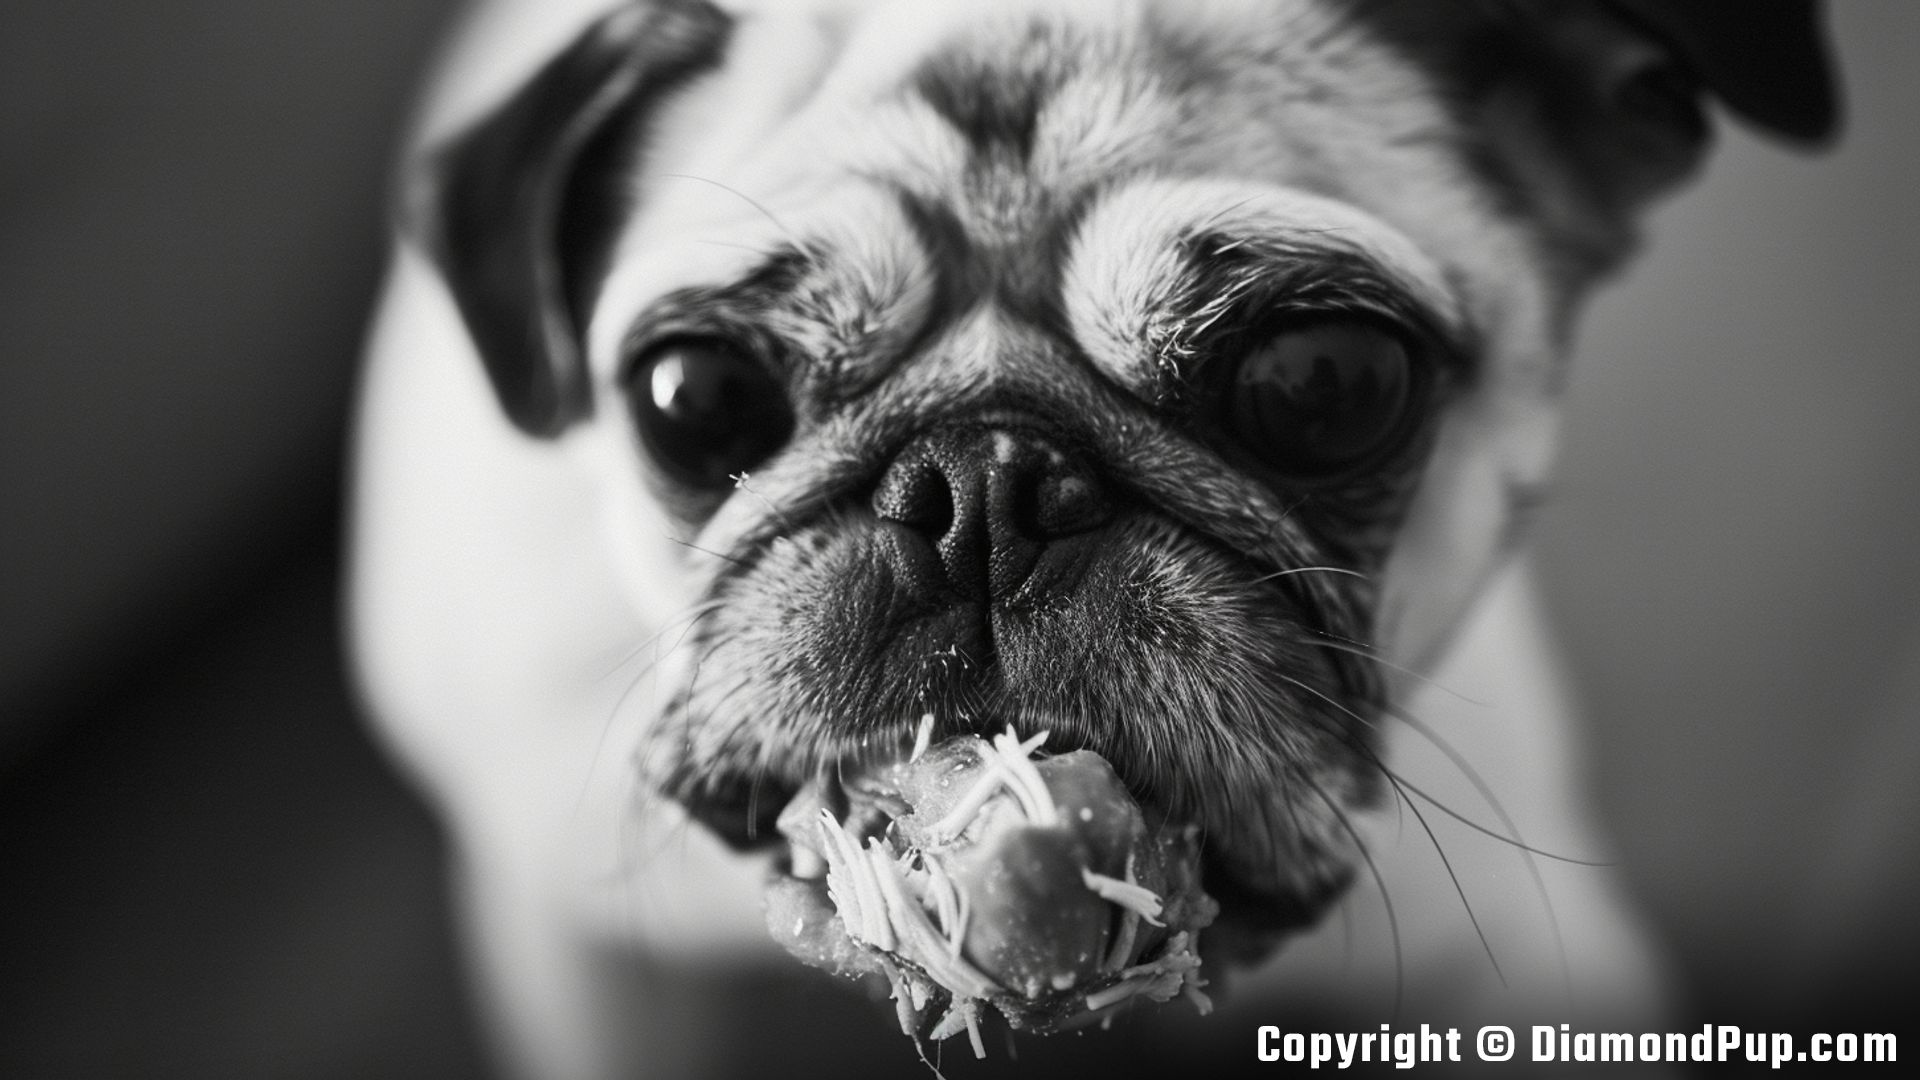 Photograph of an Adorable Pug Snacking on Chicken